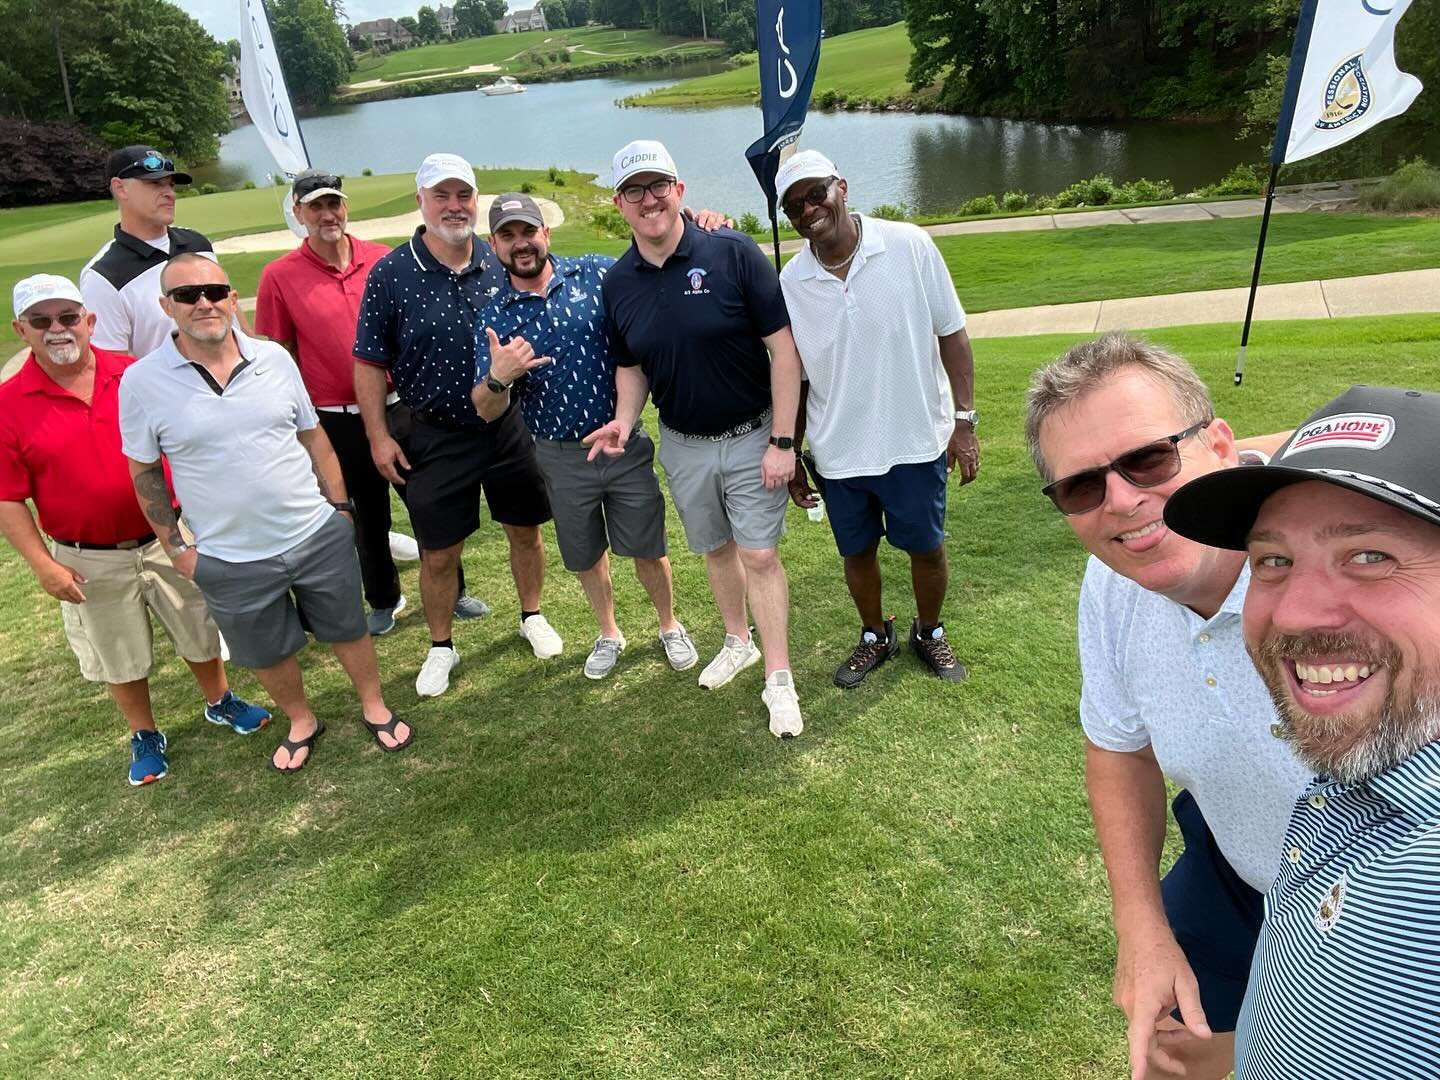 Great day @tpcfreedomfoundation 2nd annual outing, played @trumpgolfcharlotte. Two PGA HOPE CLT teams were sponsored by Total Packaging Company Inc and donations towards @reachcarolinas @pgahope